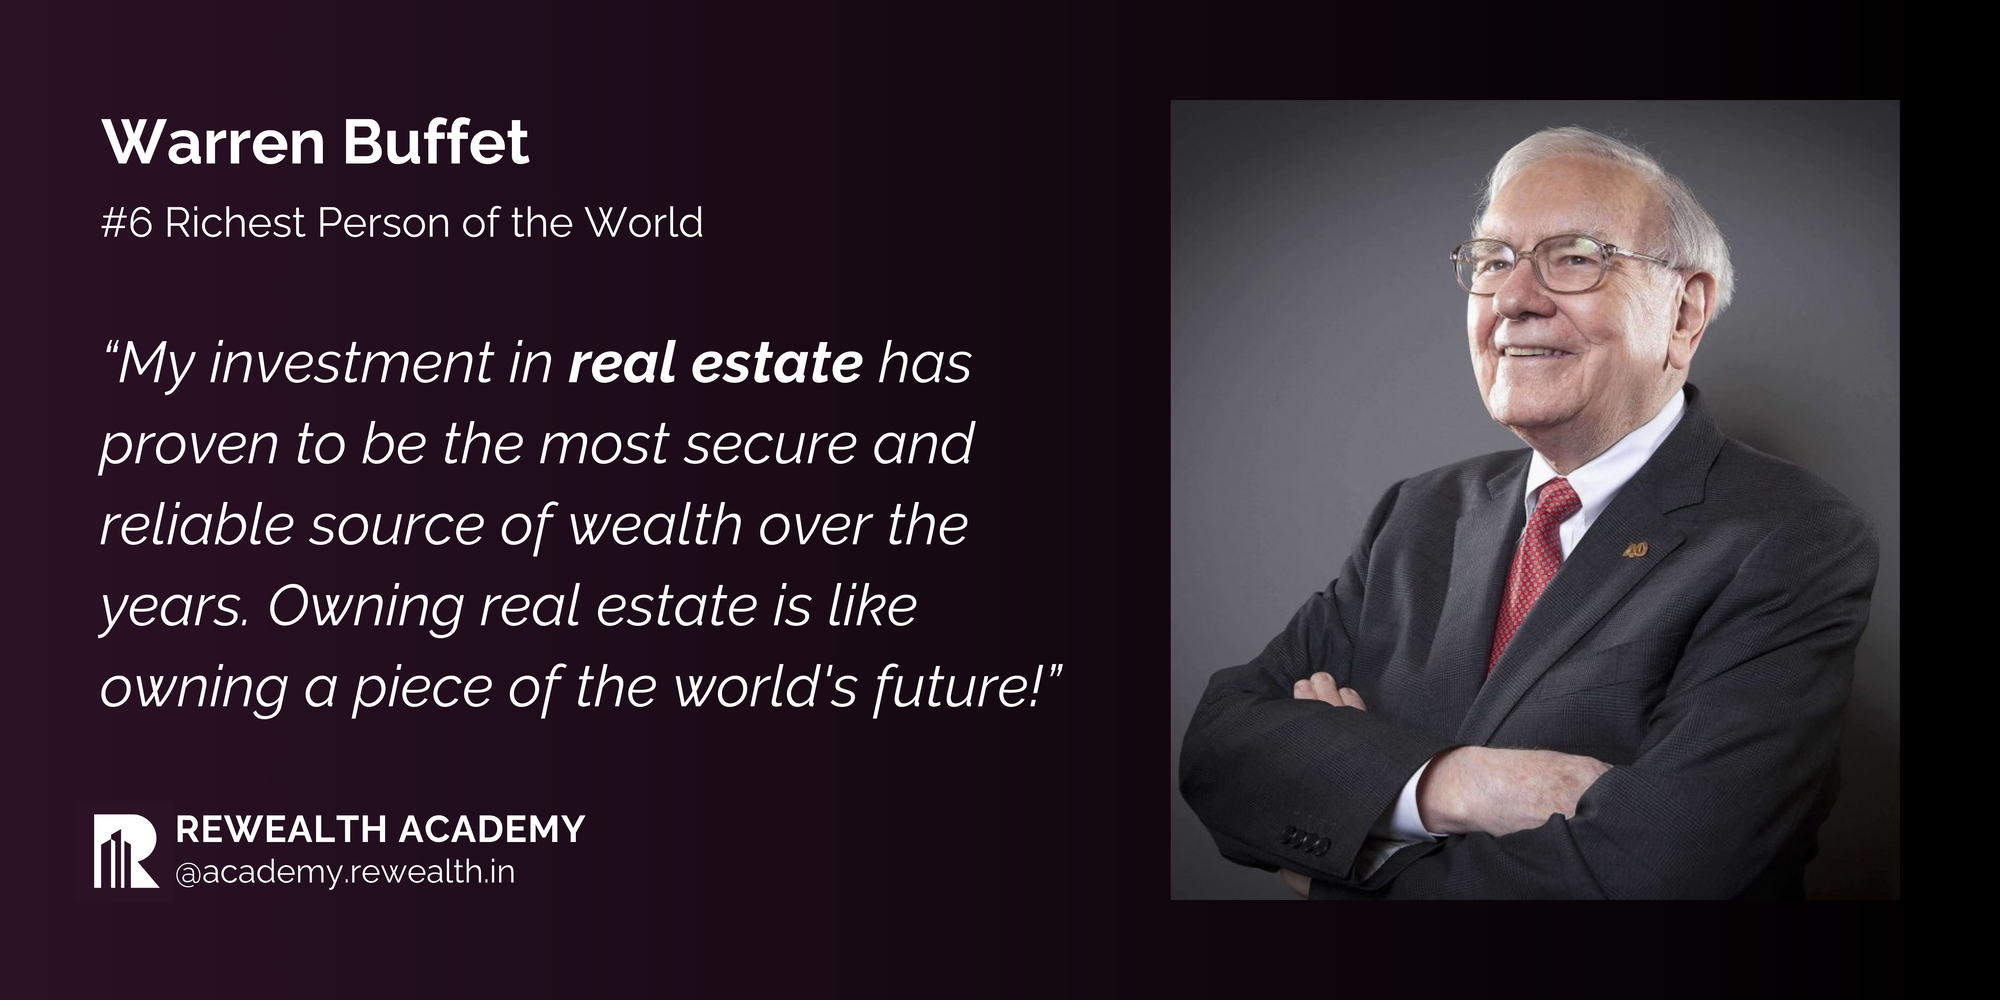 Real Estate Investment in India Quotes by Warren Buffet on Rewealth